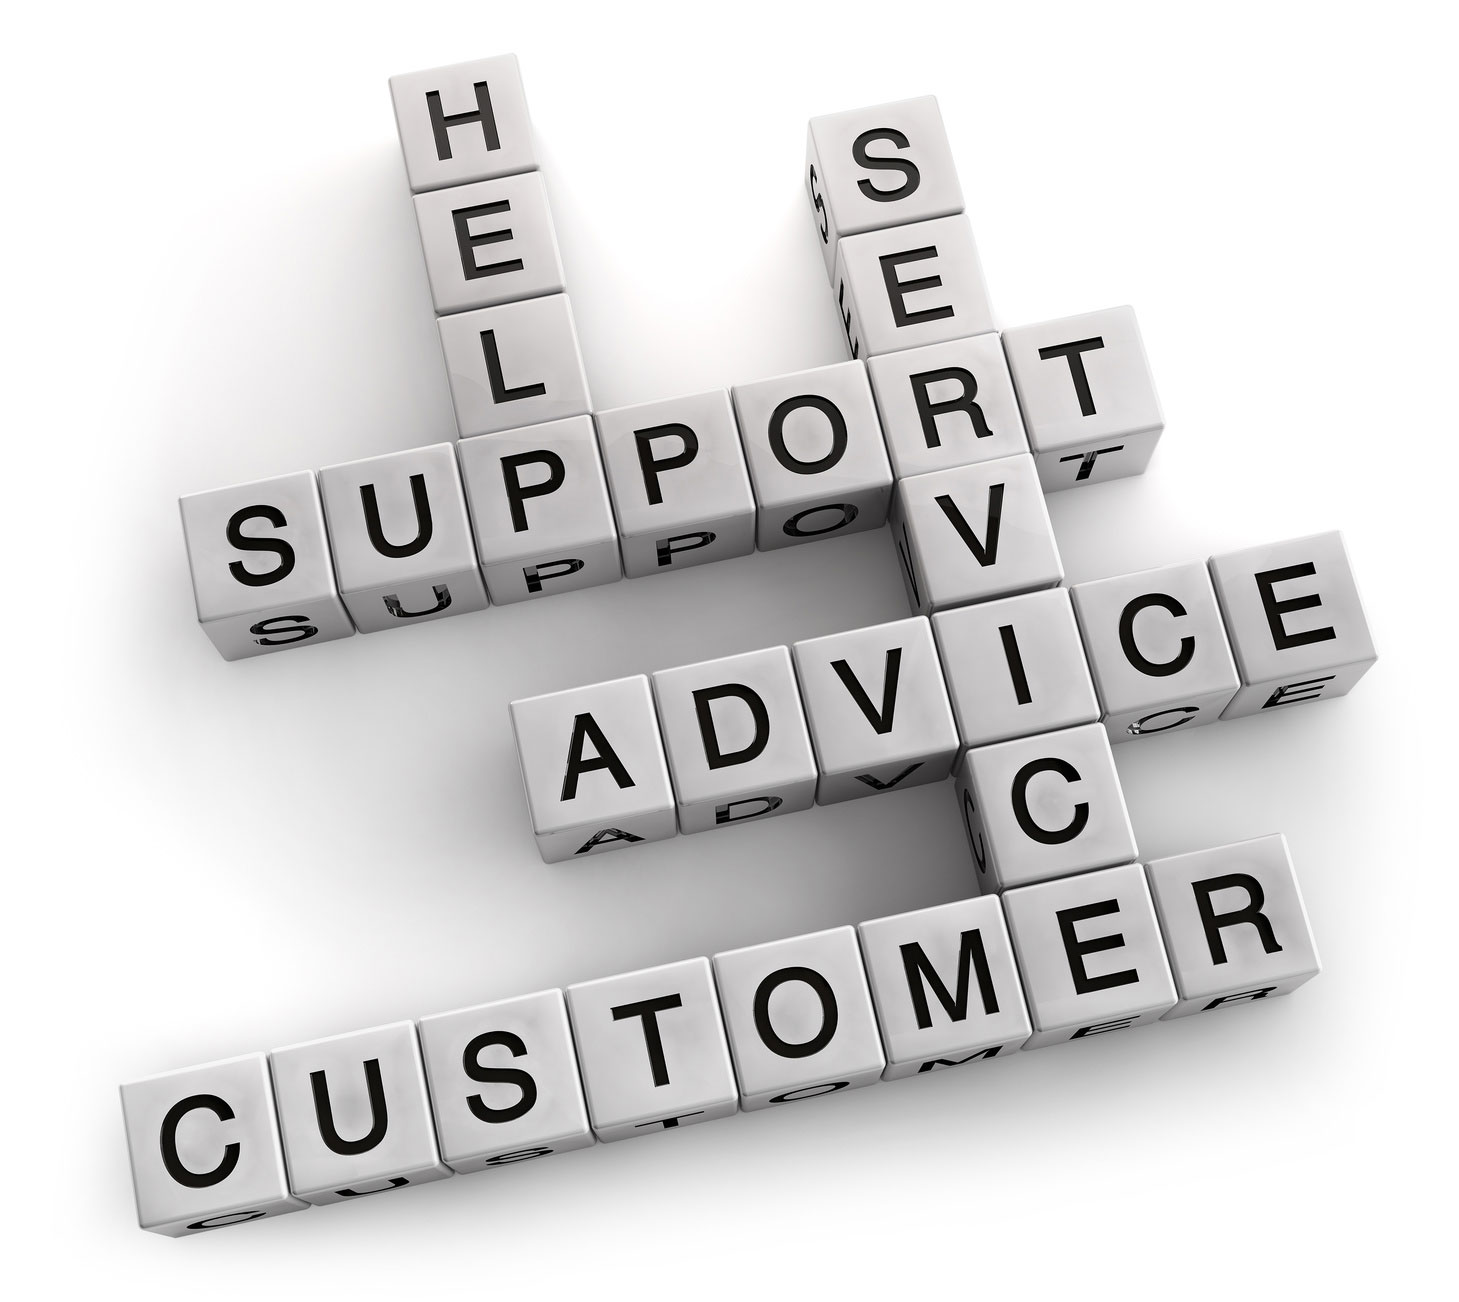 Stations quote: Client, Advice, Service, Help